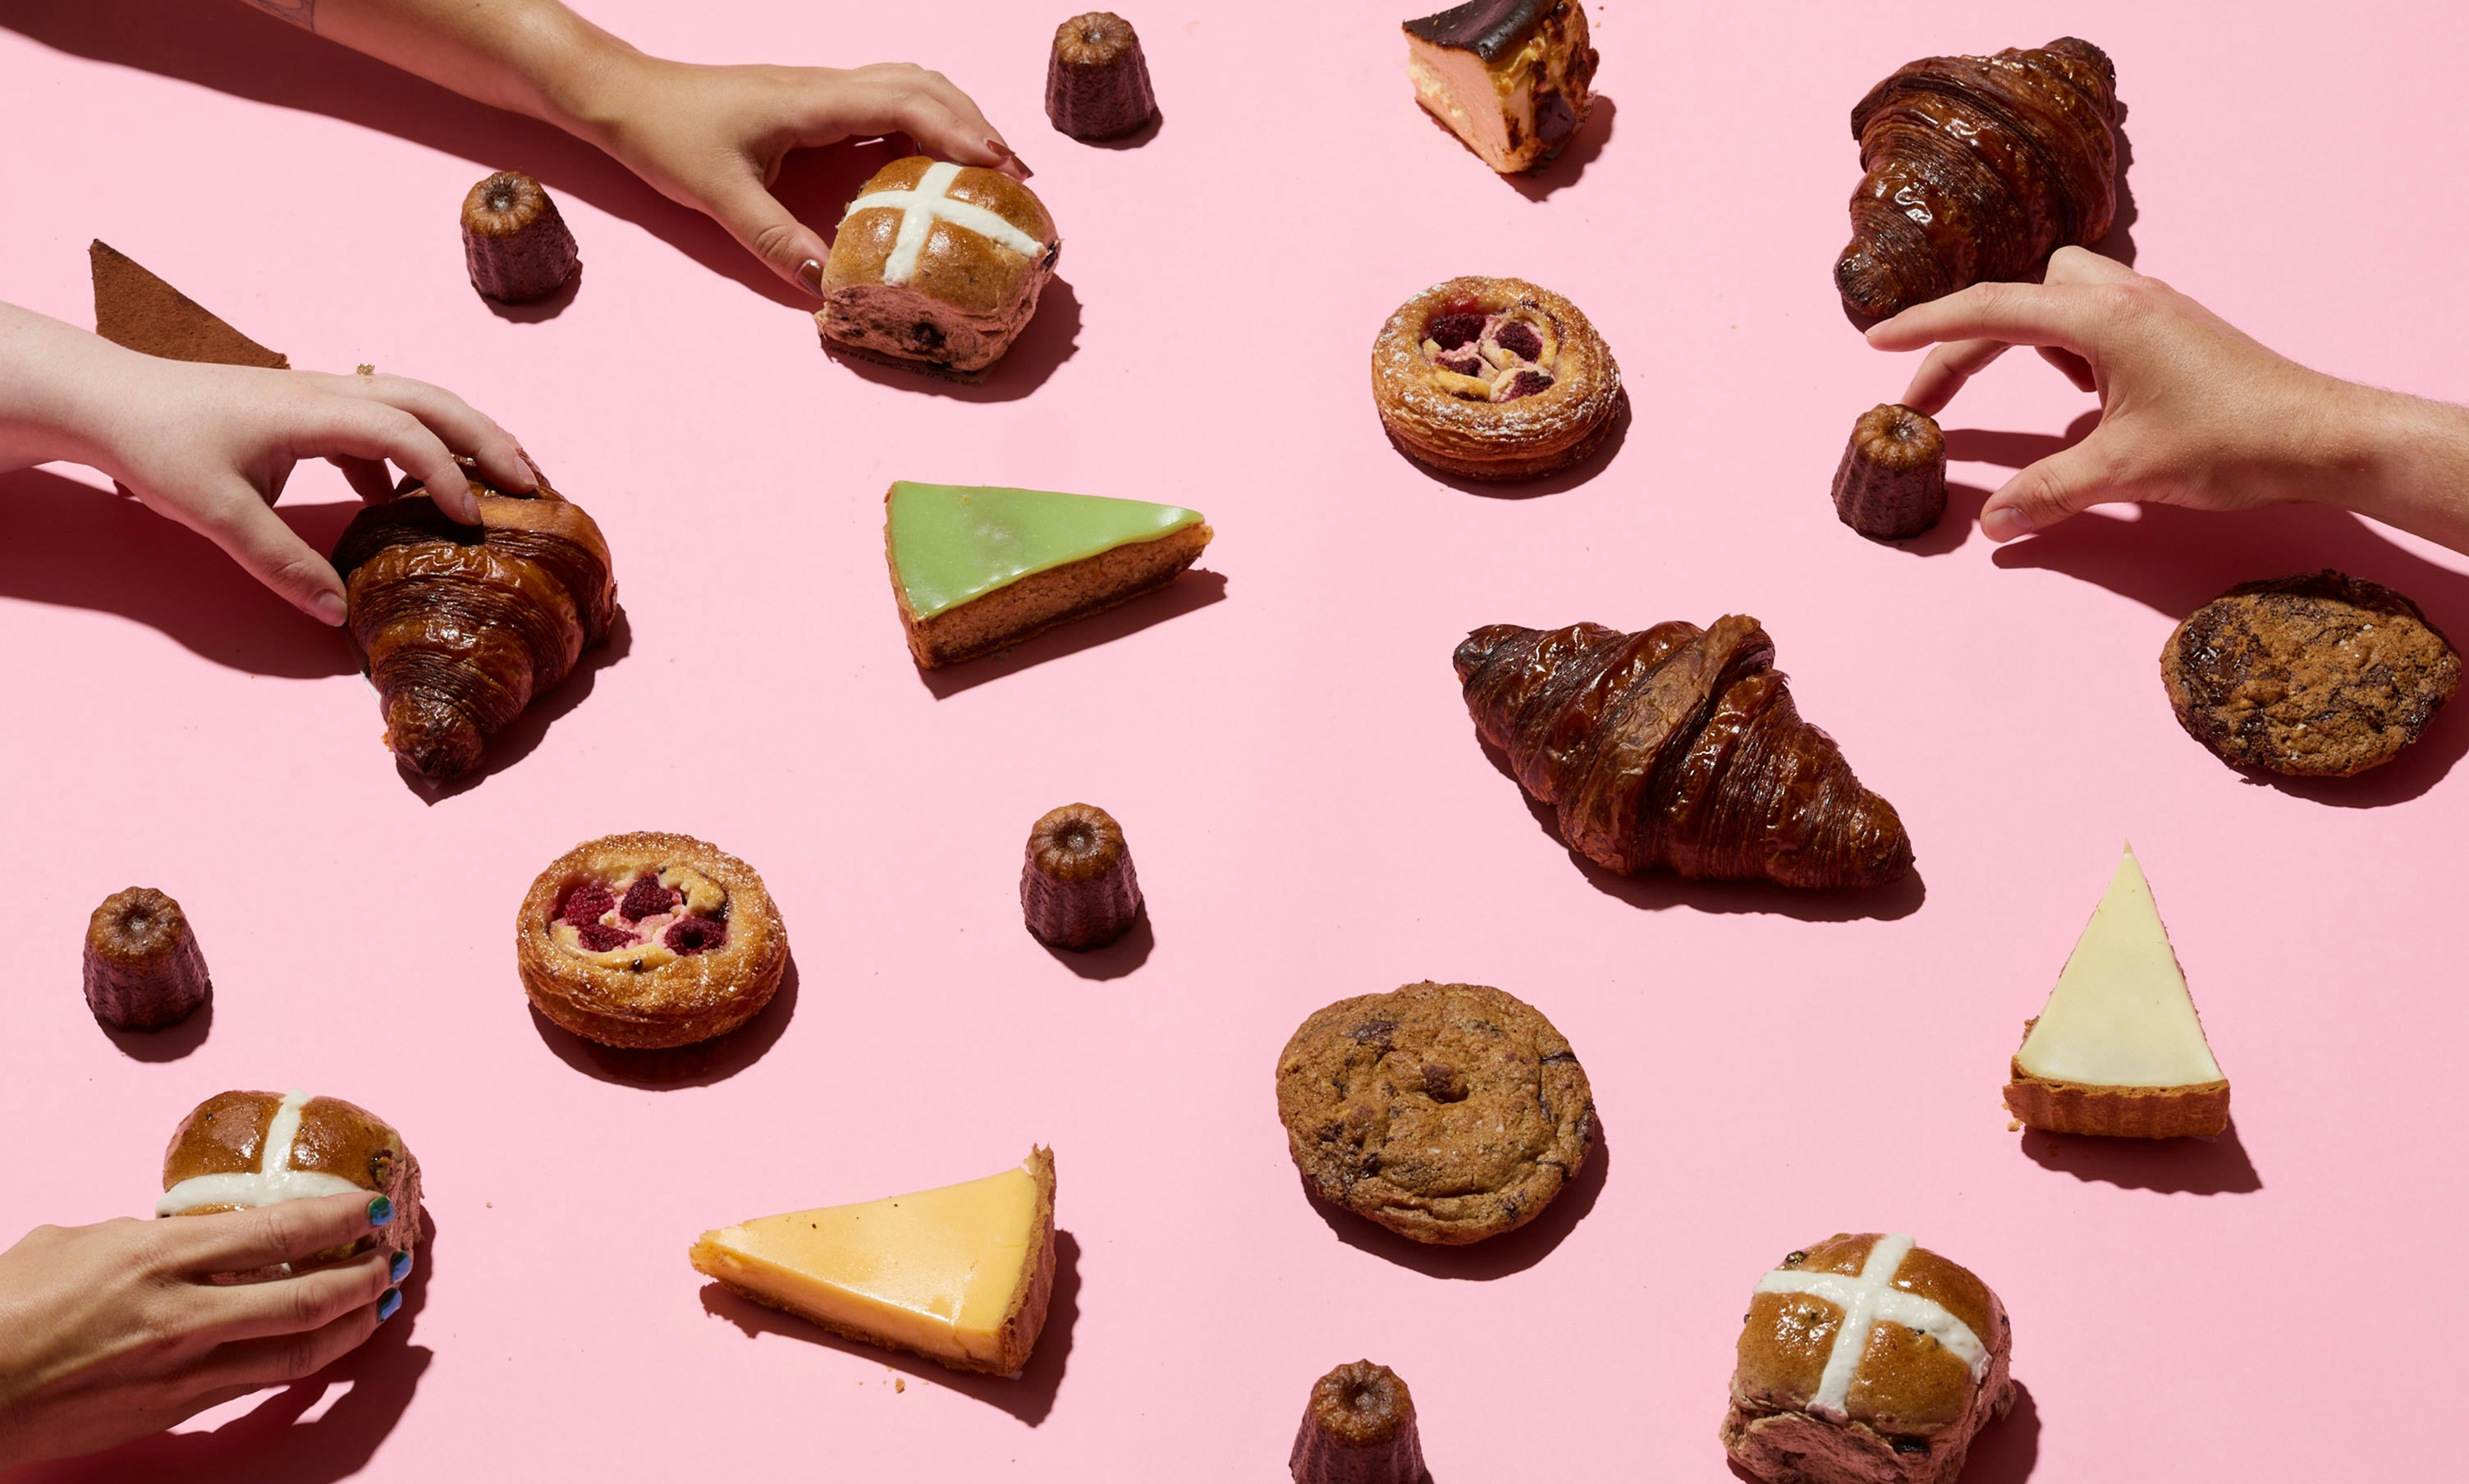 Lots of different pastries sitting on a light pink background with three hands coming in from the left grabbing three different items